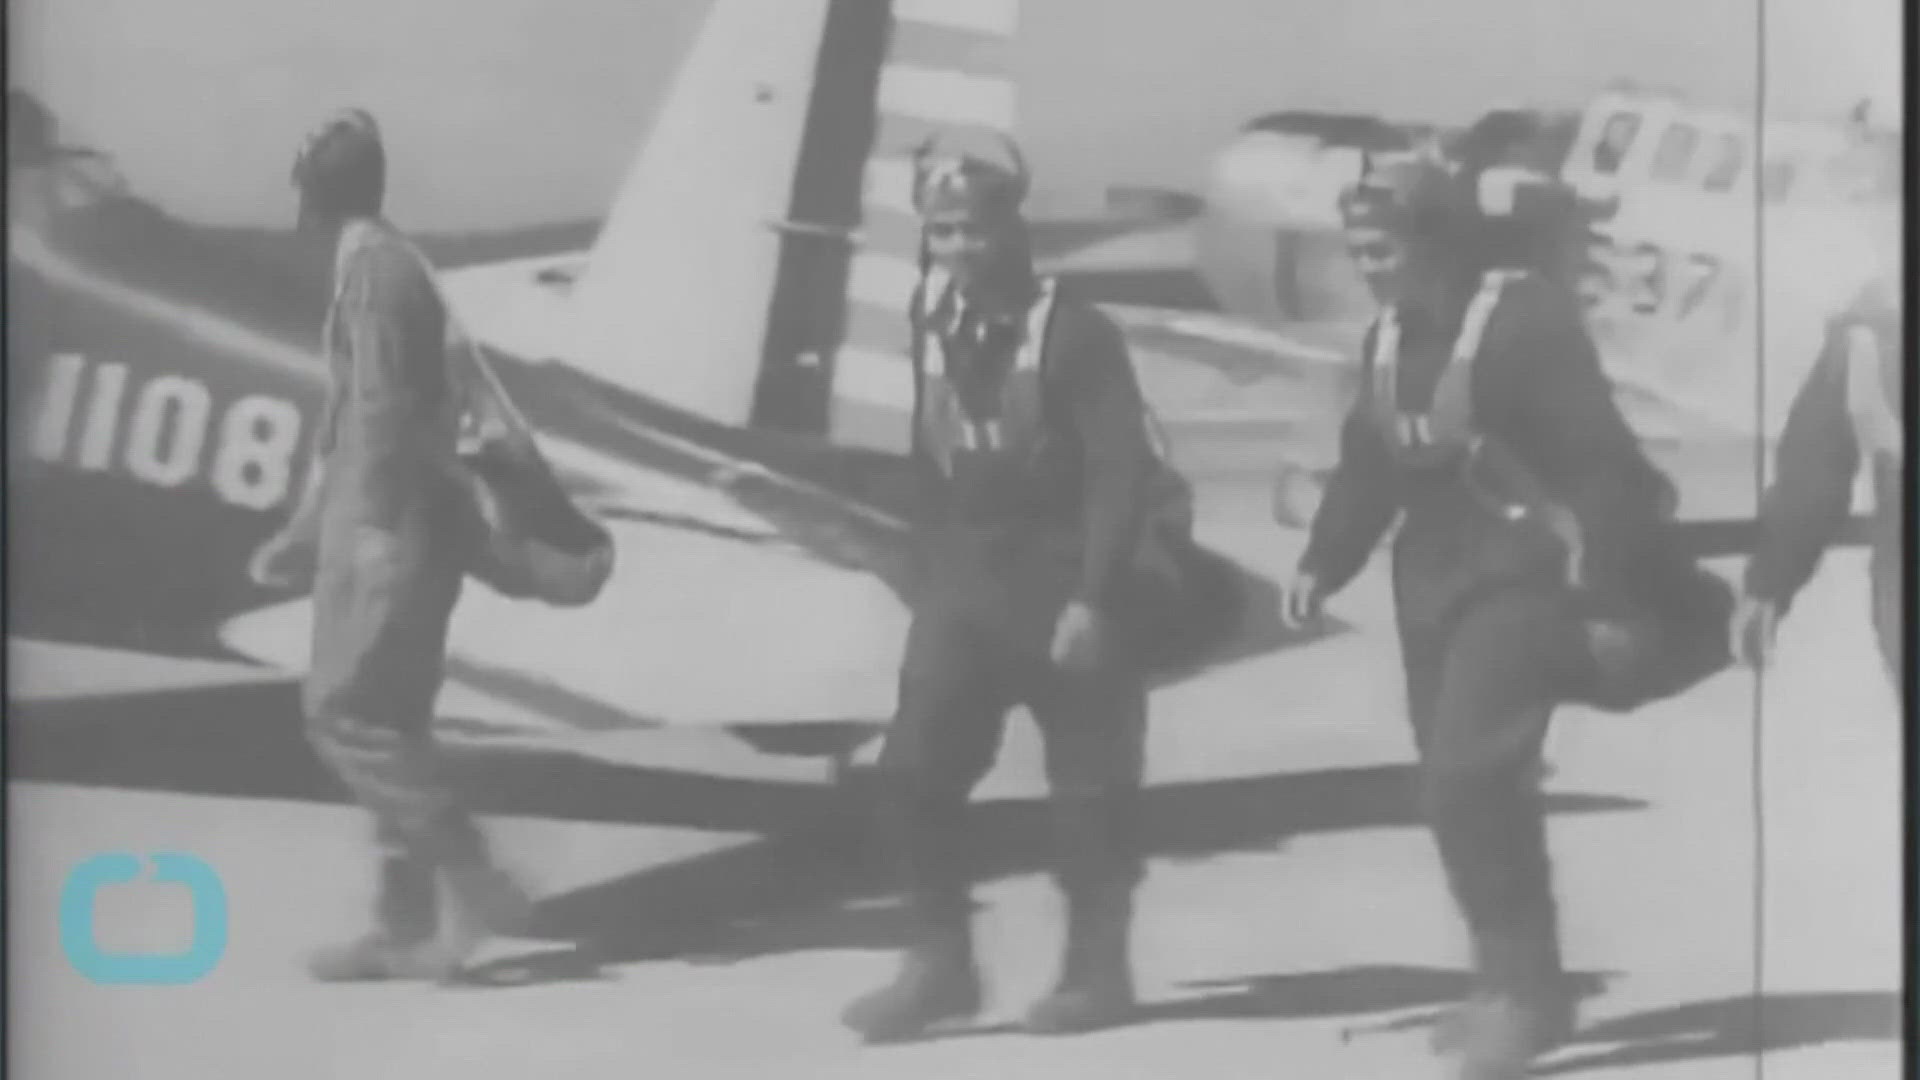 13News reporter Emily Longnecker reports from Peru where a new exhibit honors the Tuskegee Airmen.